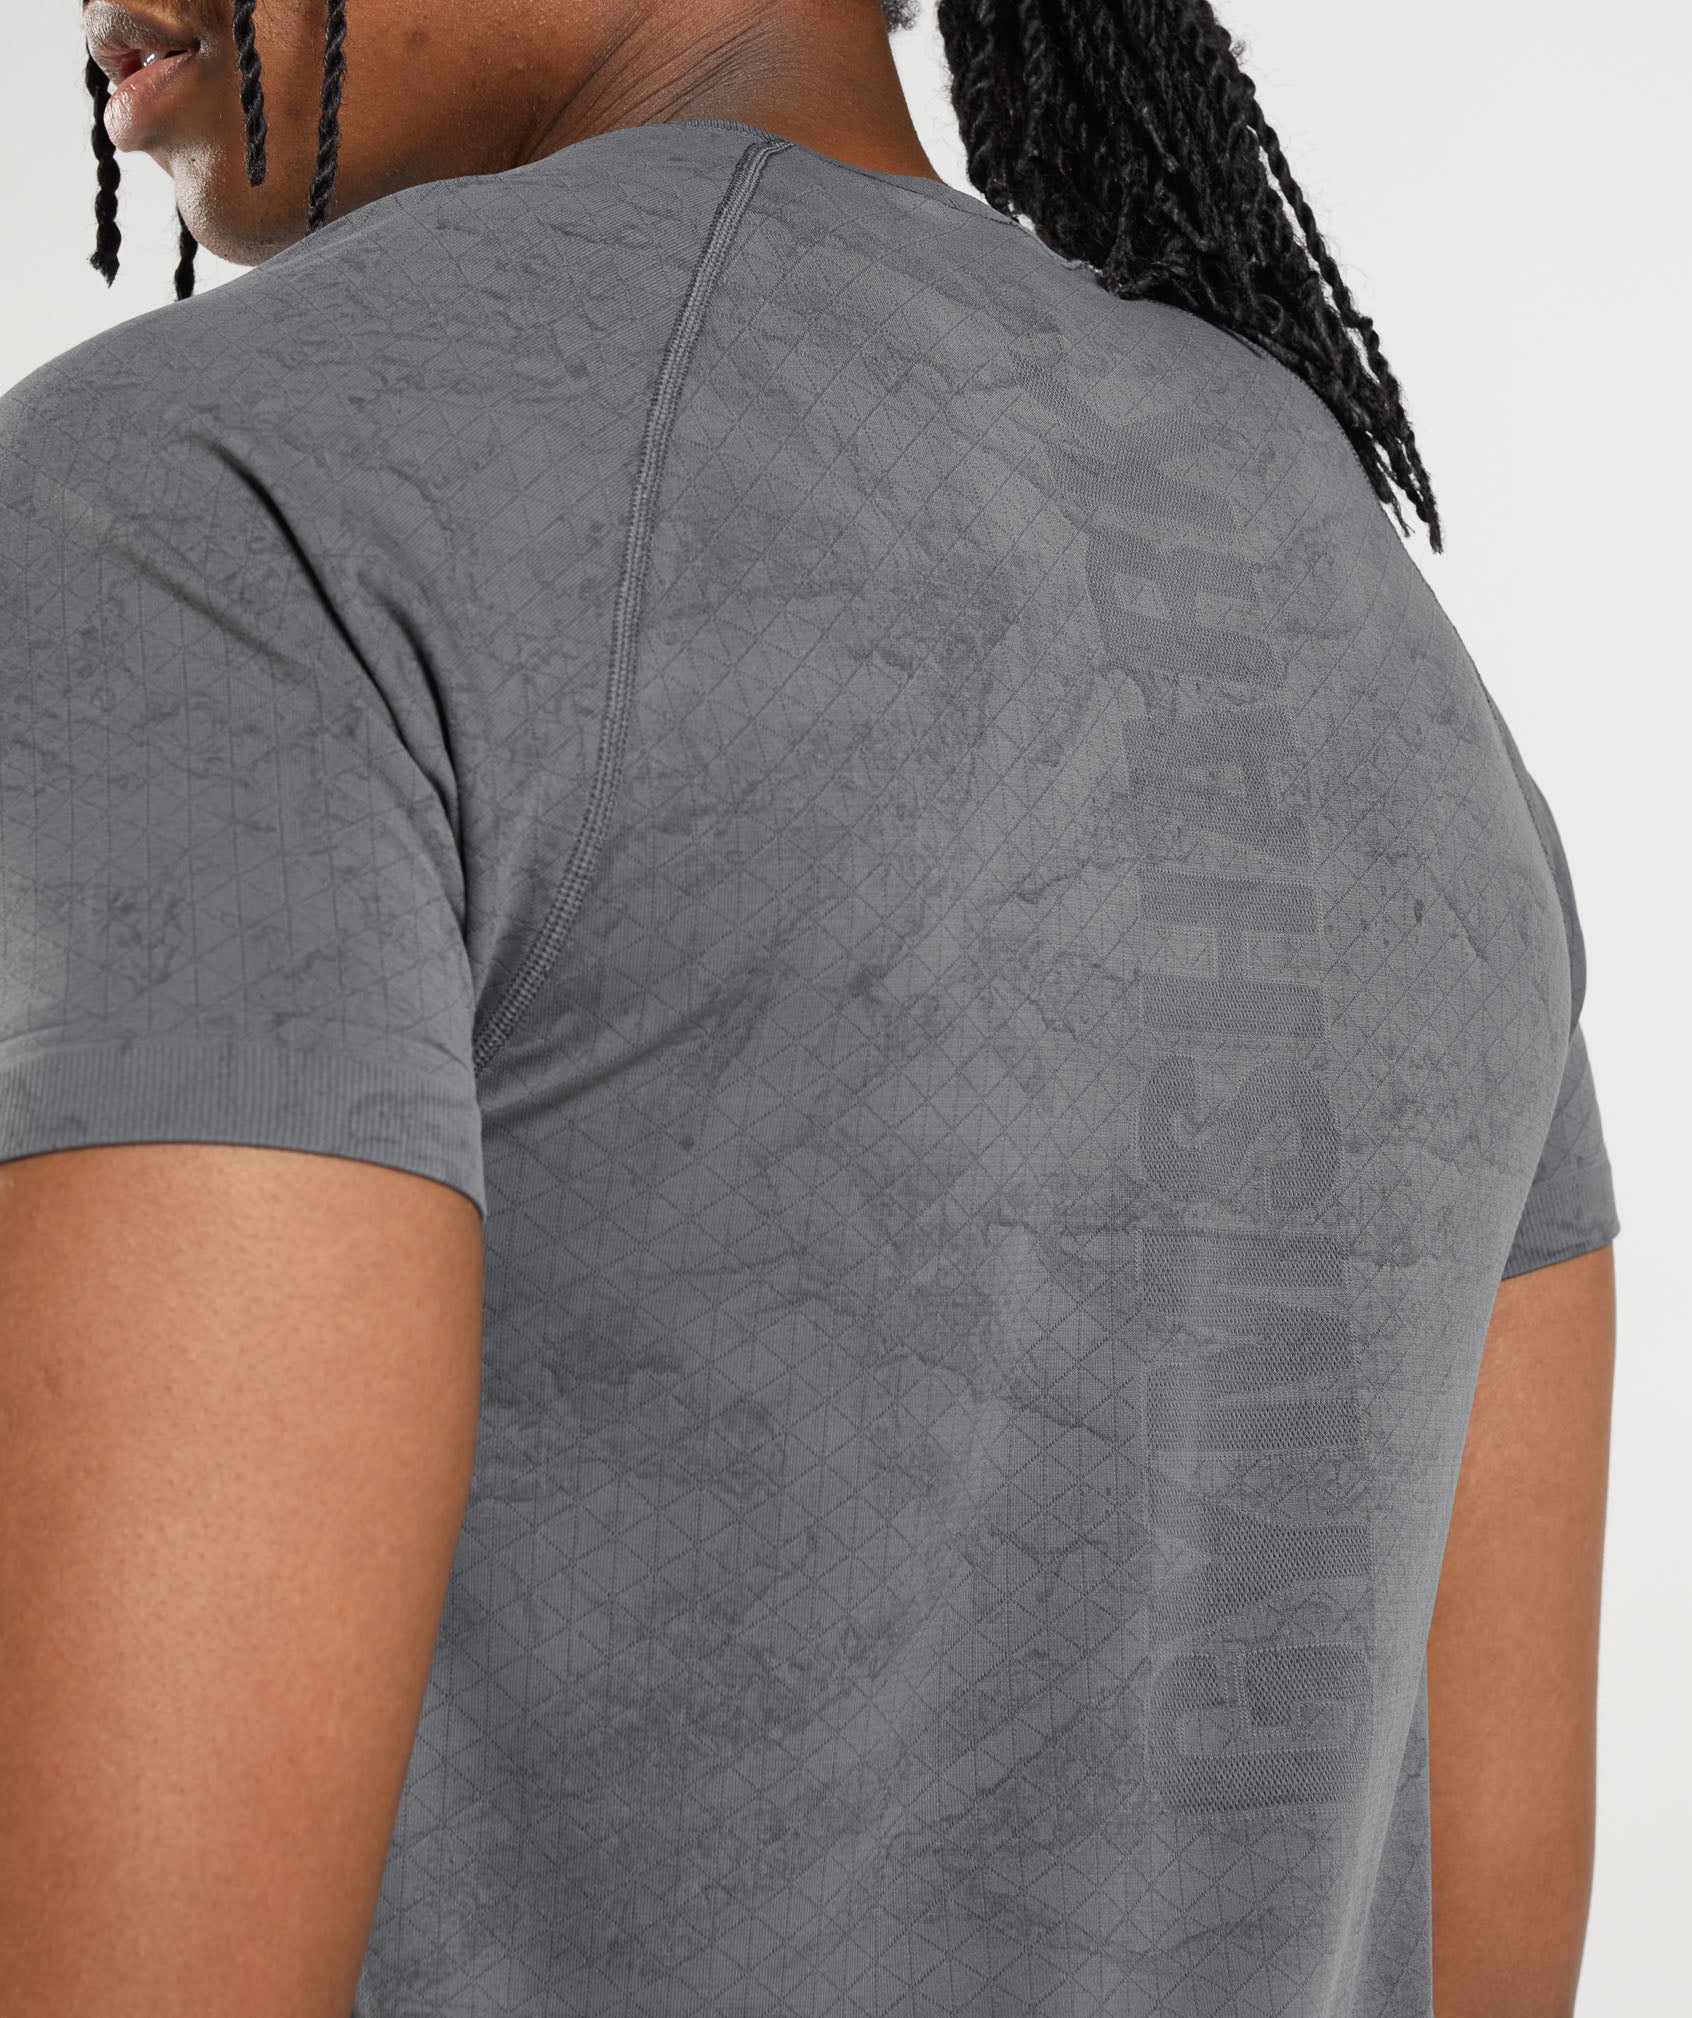 Geo Seamless T-Shirt in Charcoal Grey/Black - view 5